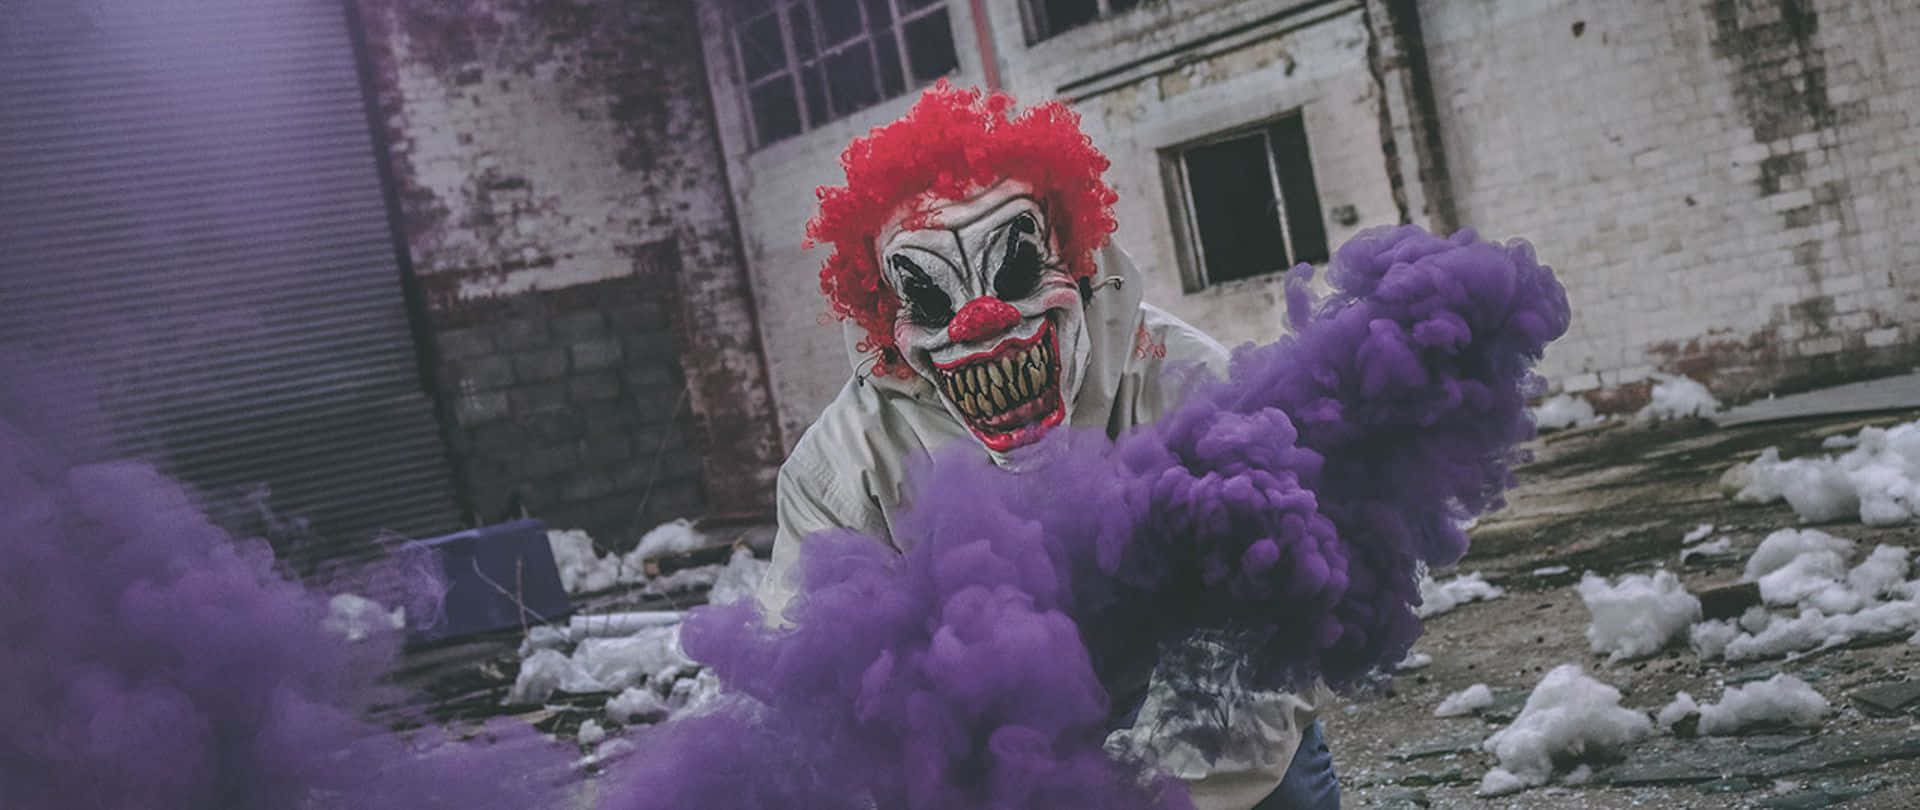 Terror grips the town in the wake of the mysterious clown